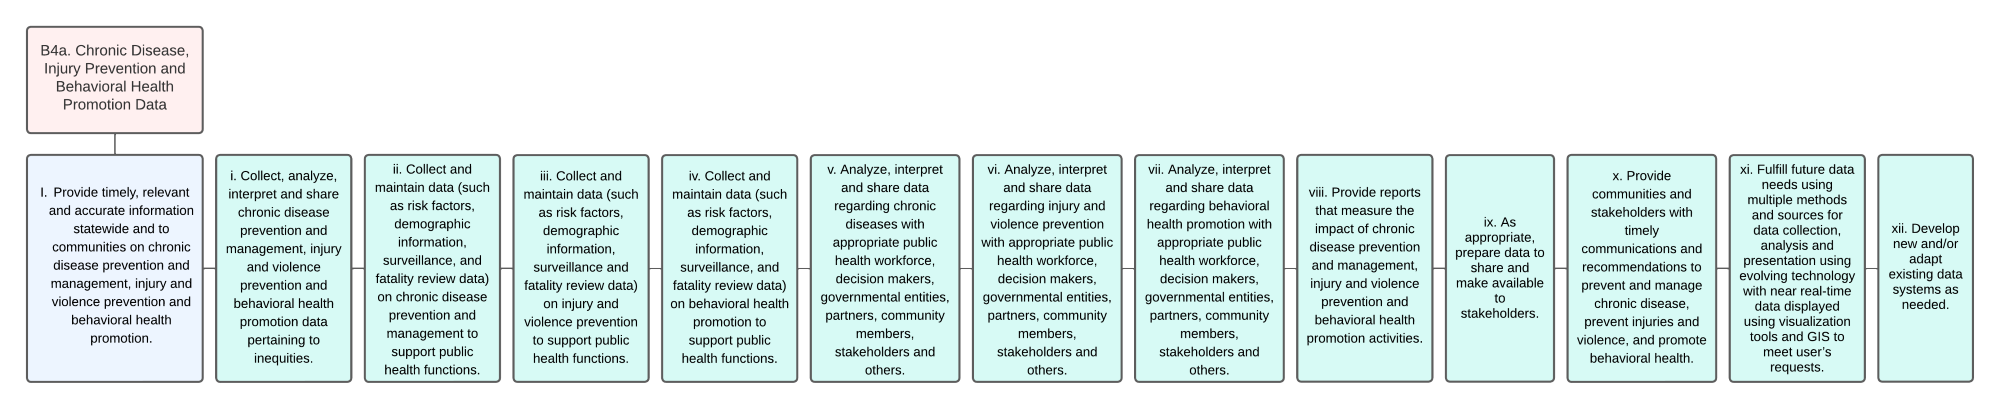 Organizational Chart of Chronic Disease Injury Prevention and Behavioral Health Promotion Data